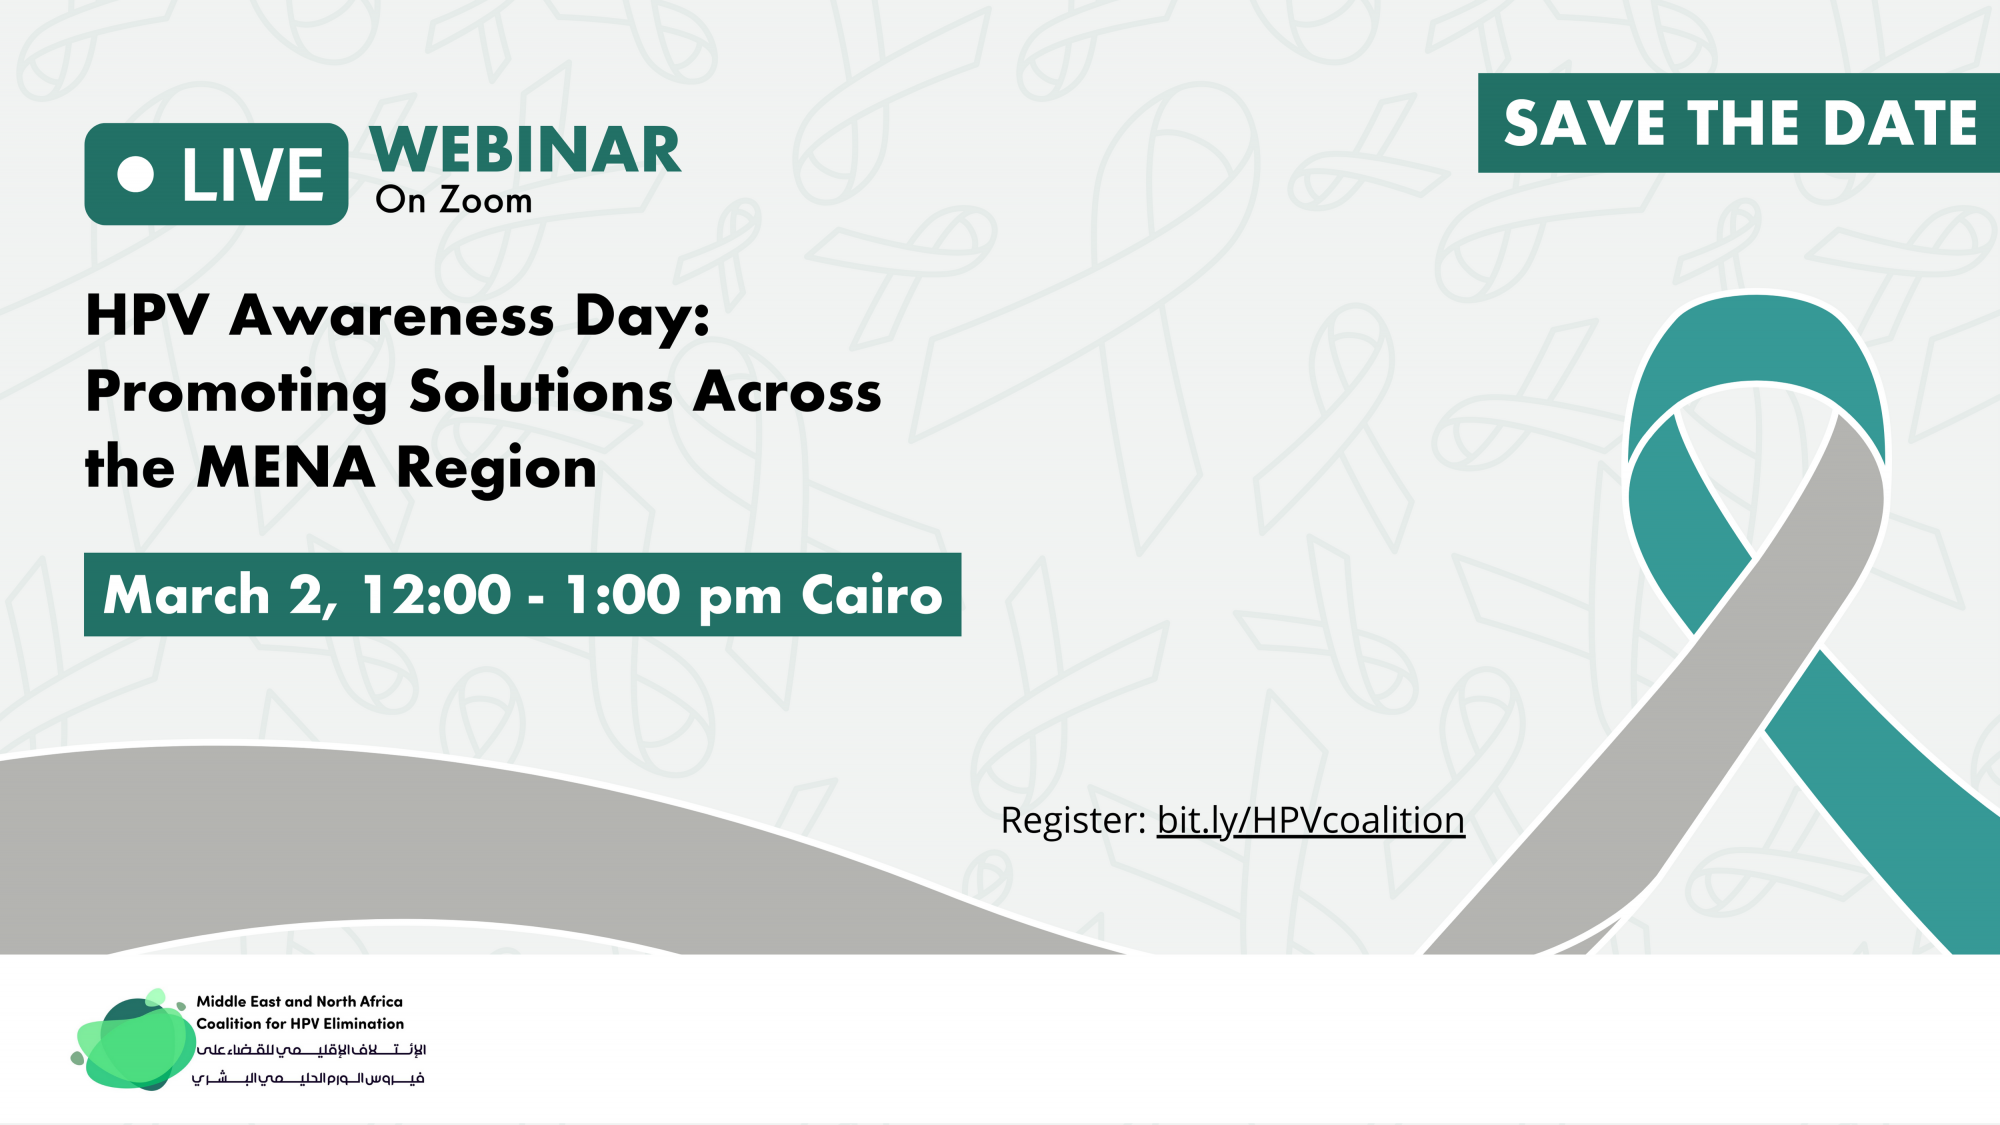 HPV Awareness Day: Promoting Solutions Across the MENA Region